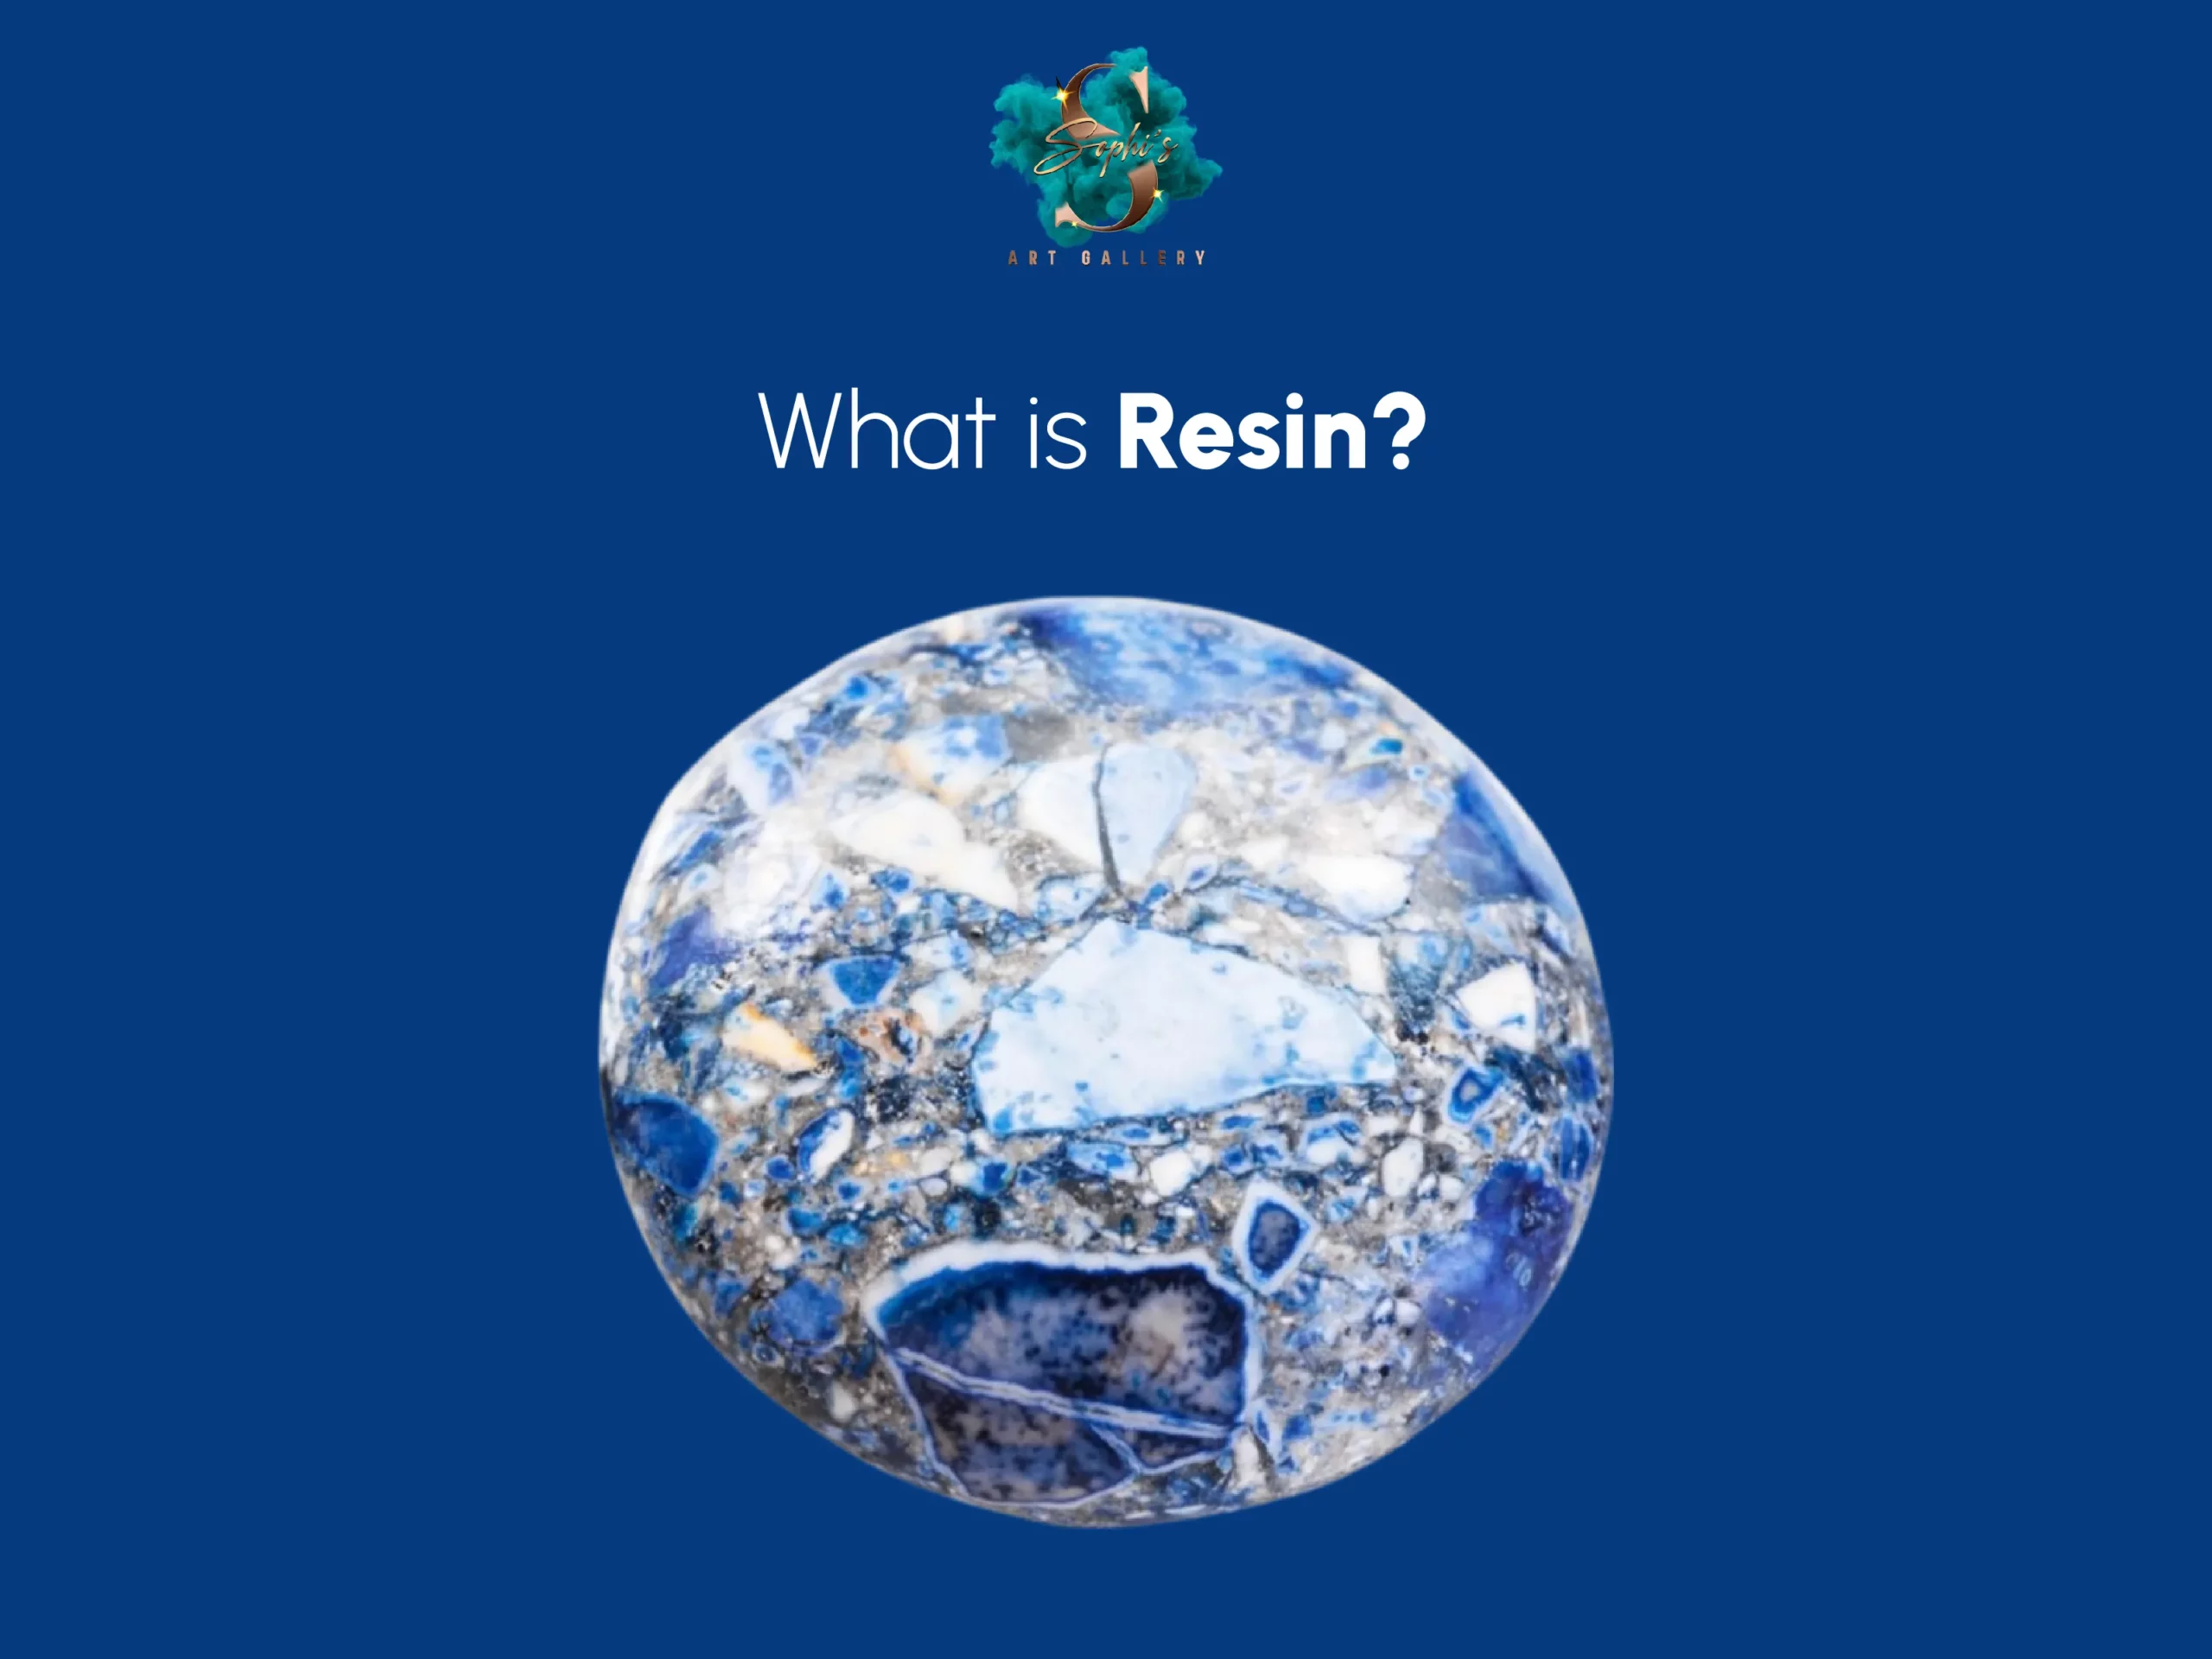 What is resin?